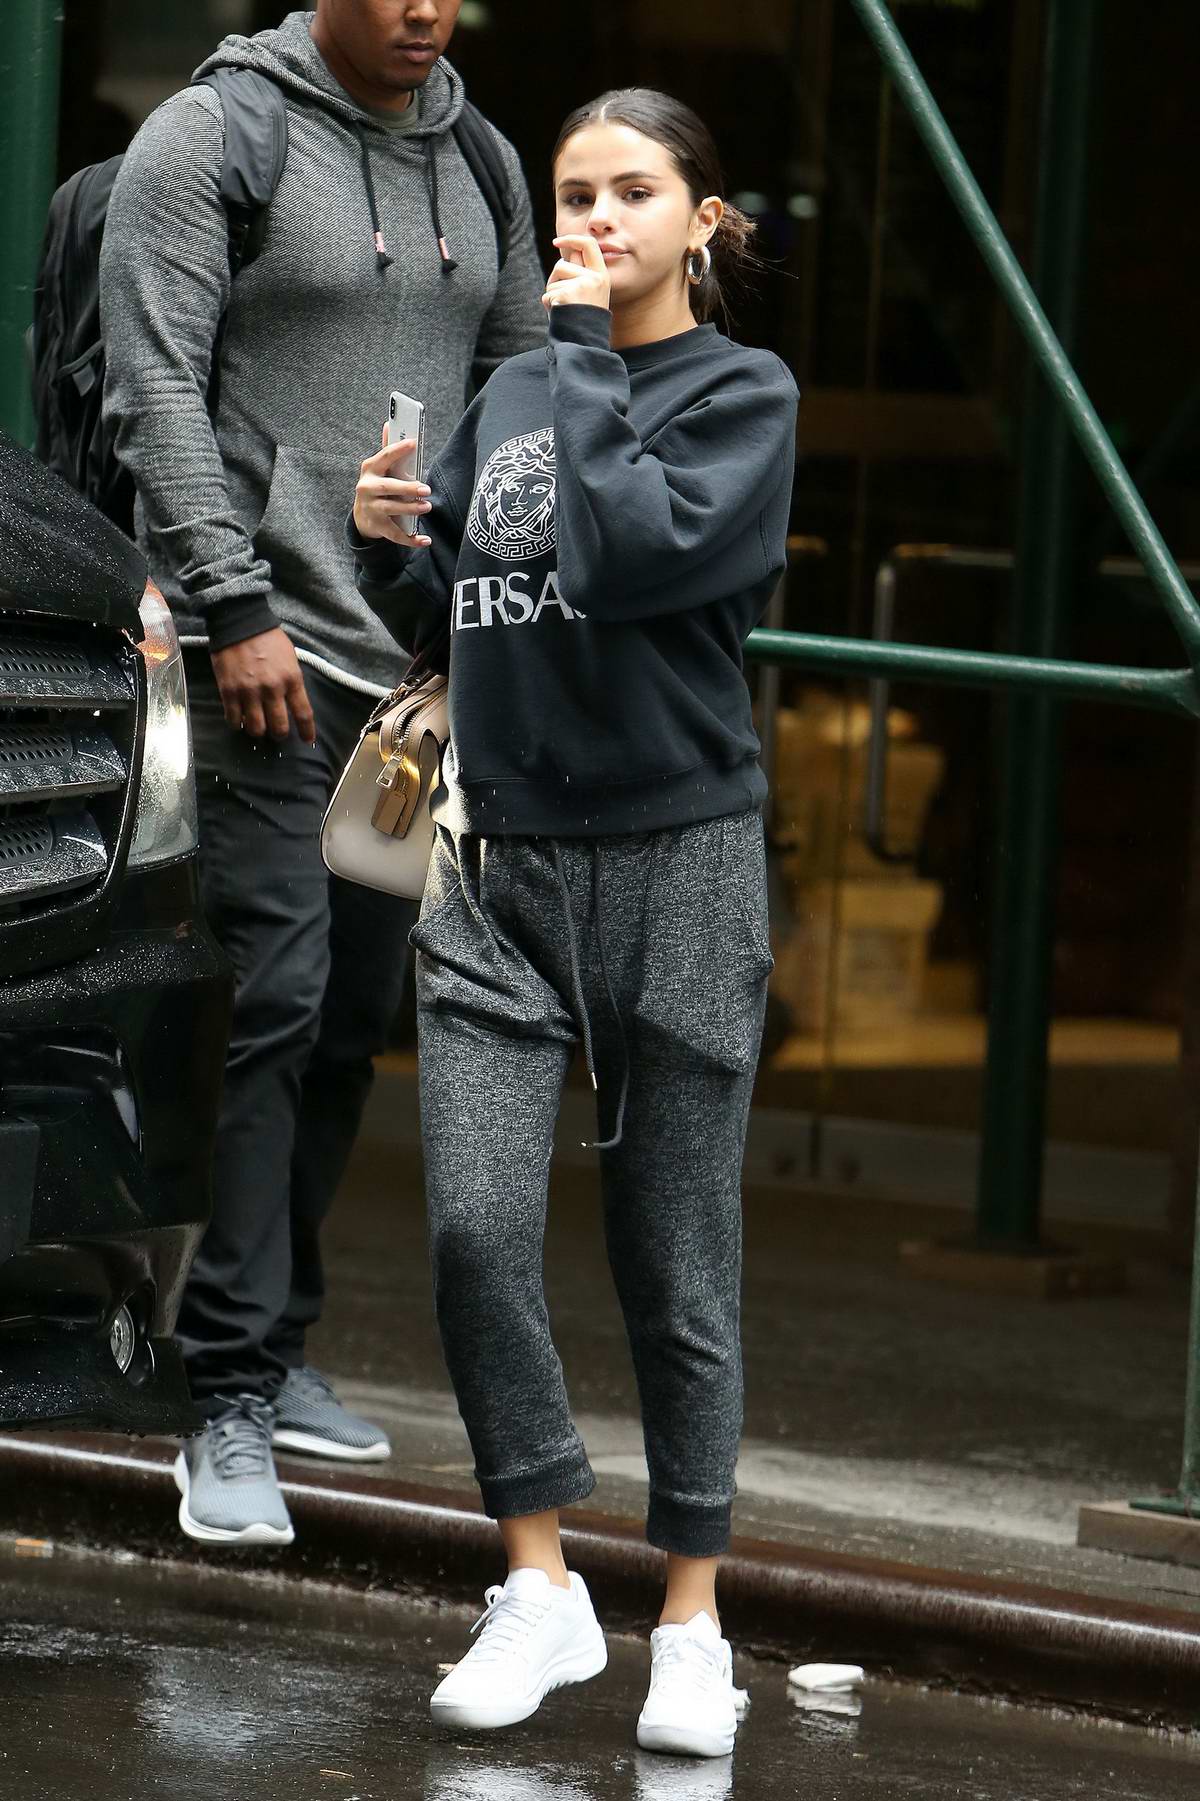 https://www.celebsfirst.com/wp-content/uploads/2018/09/selena-gomez-wears-a-grey-versace-sweatshirt-with-matching-sweatpants-as-she-steps-out-to-grab-some-iced-coffee-in-new-york-city-100918_10.jpg